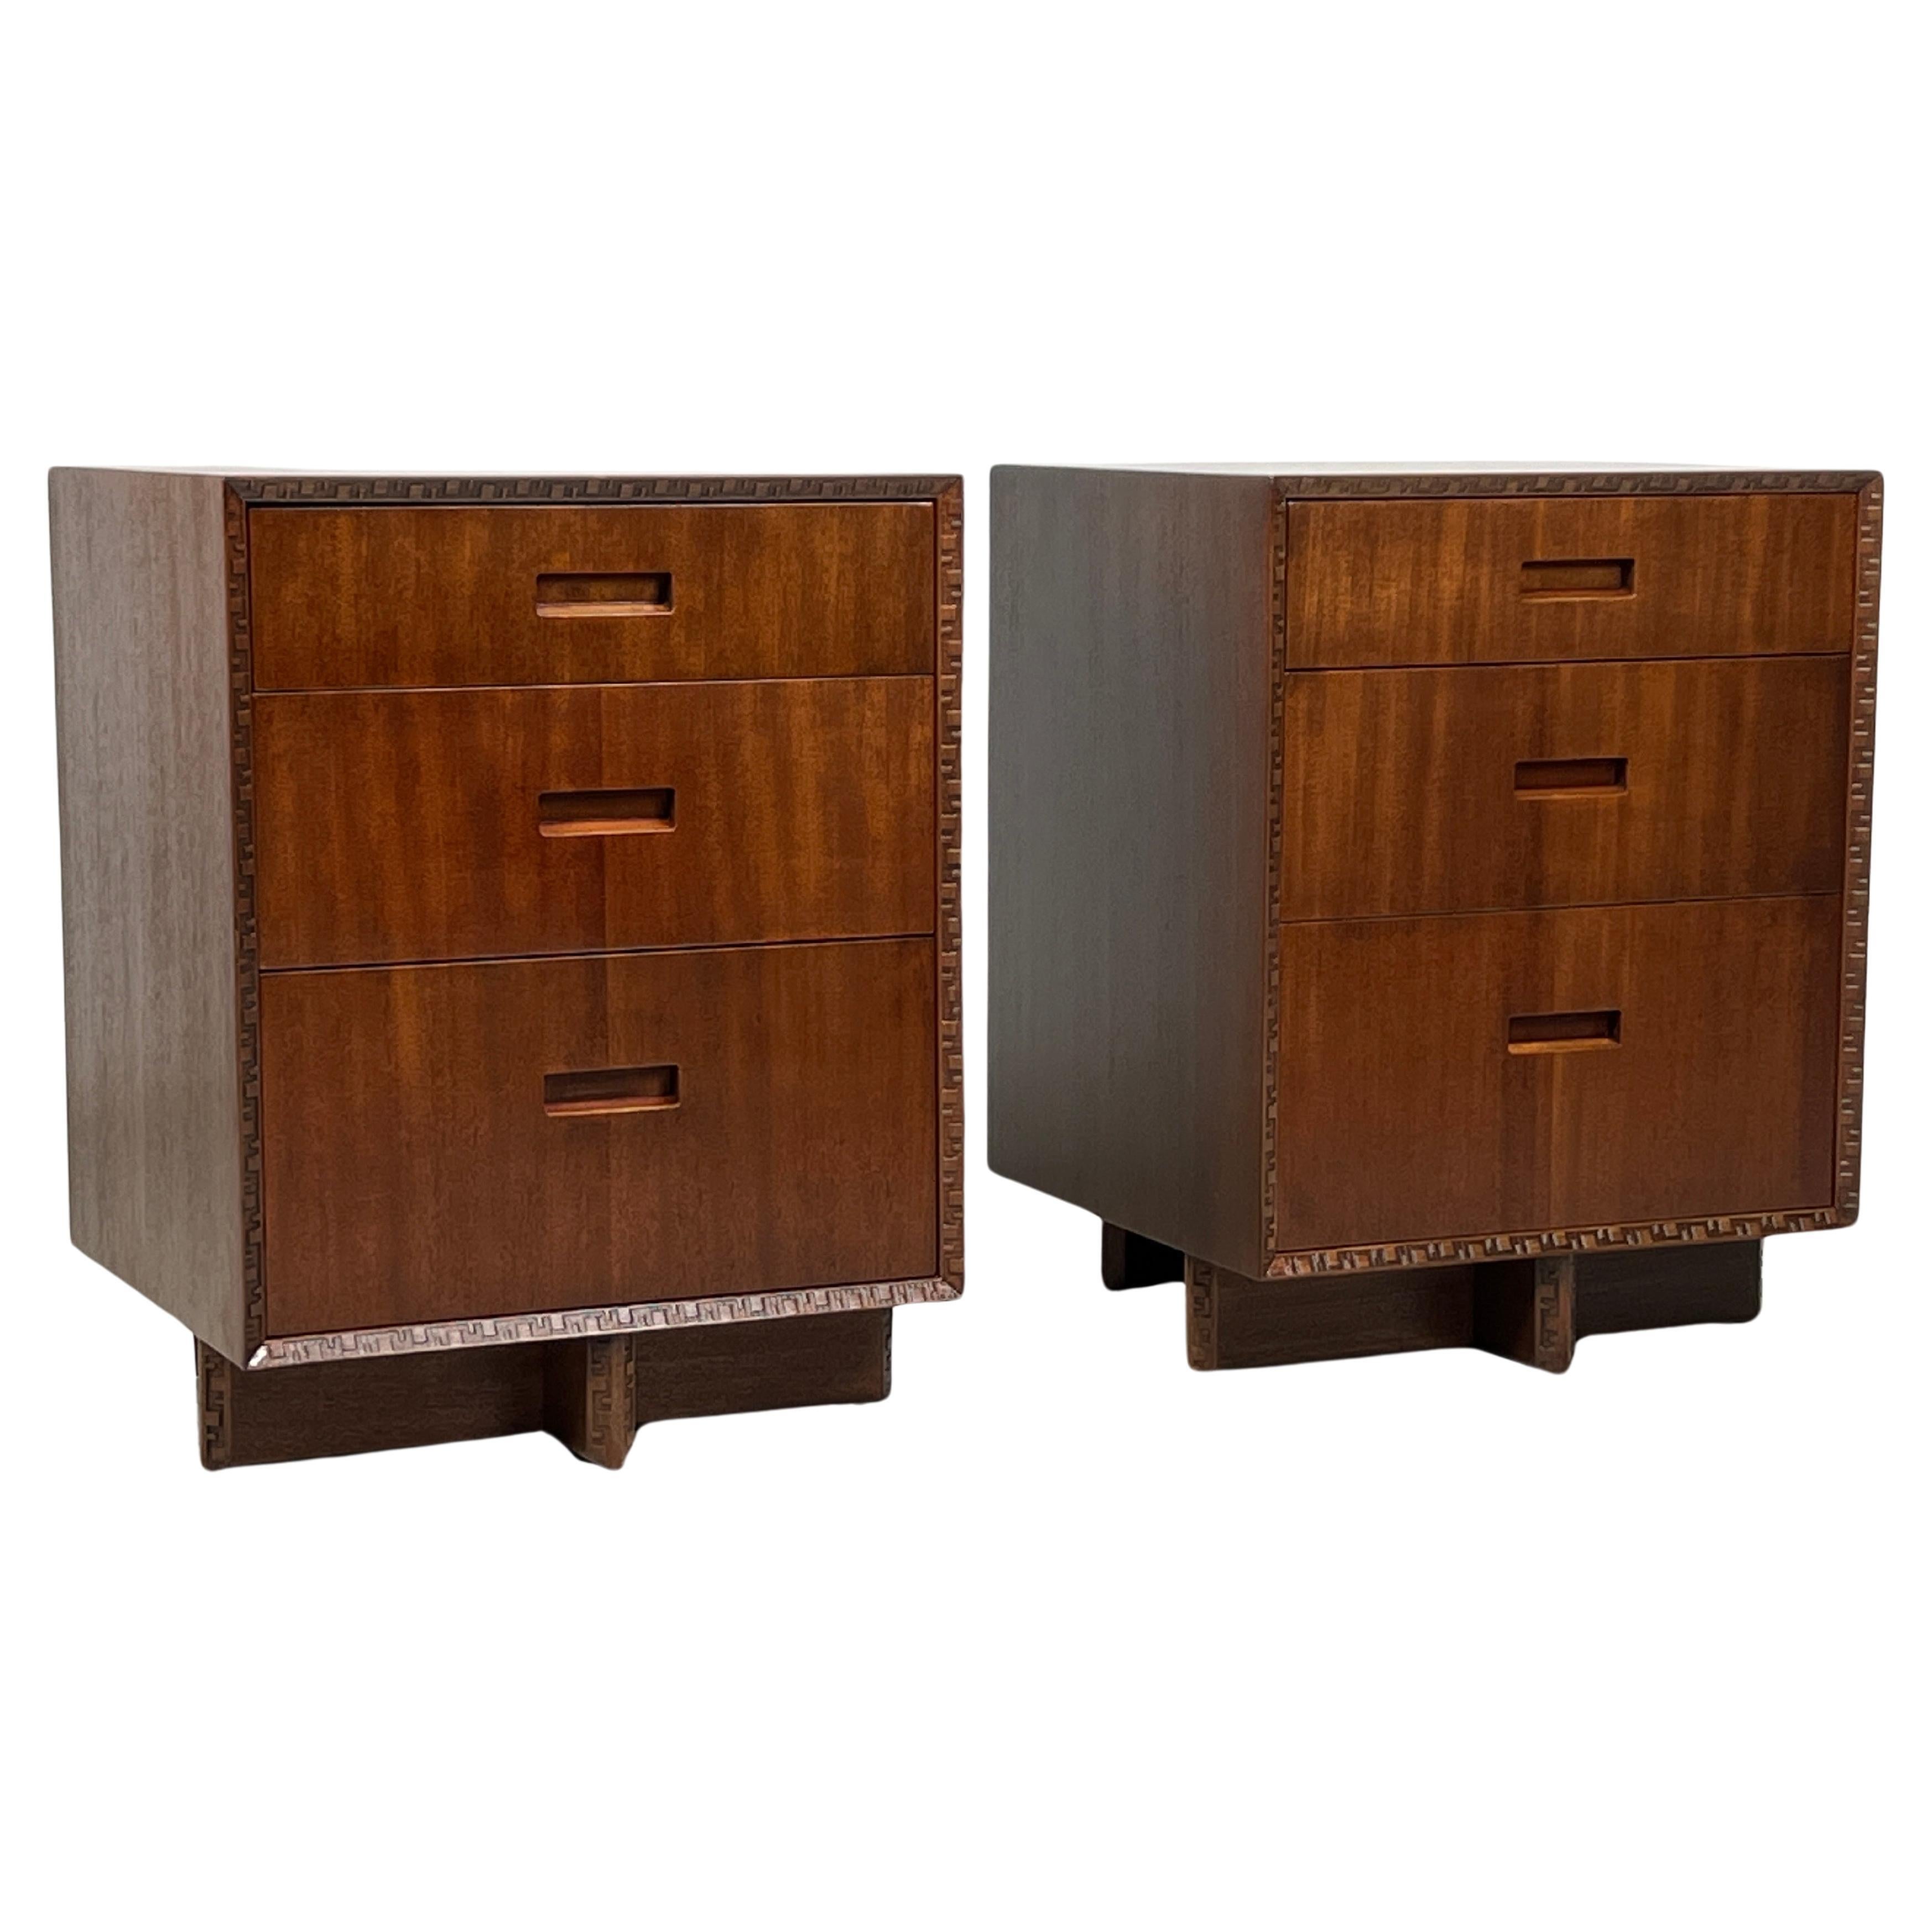 Pair of Nightstands / Small Cabinets by Frank Lloyd Wright for Henredon  For Sale